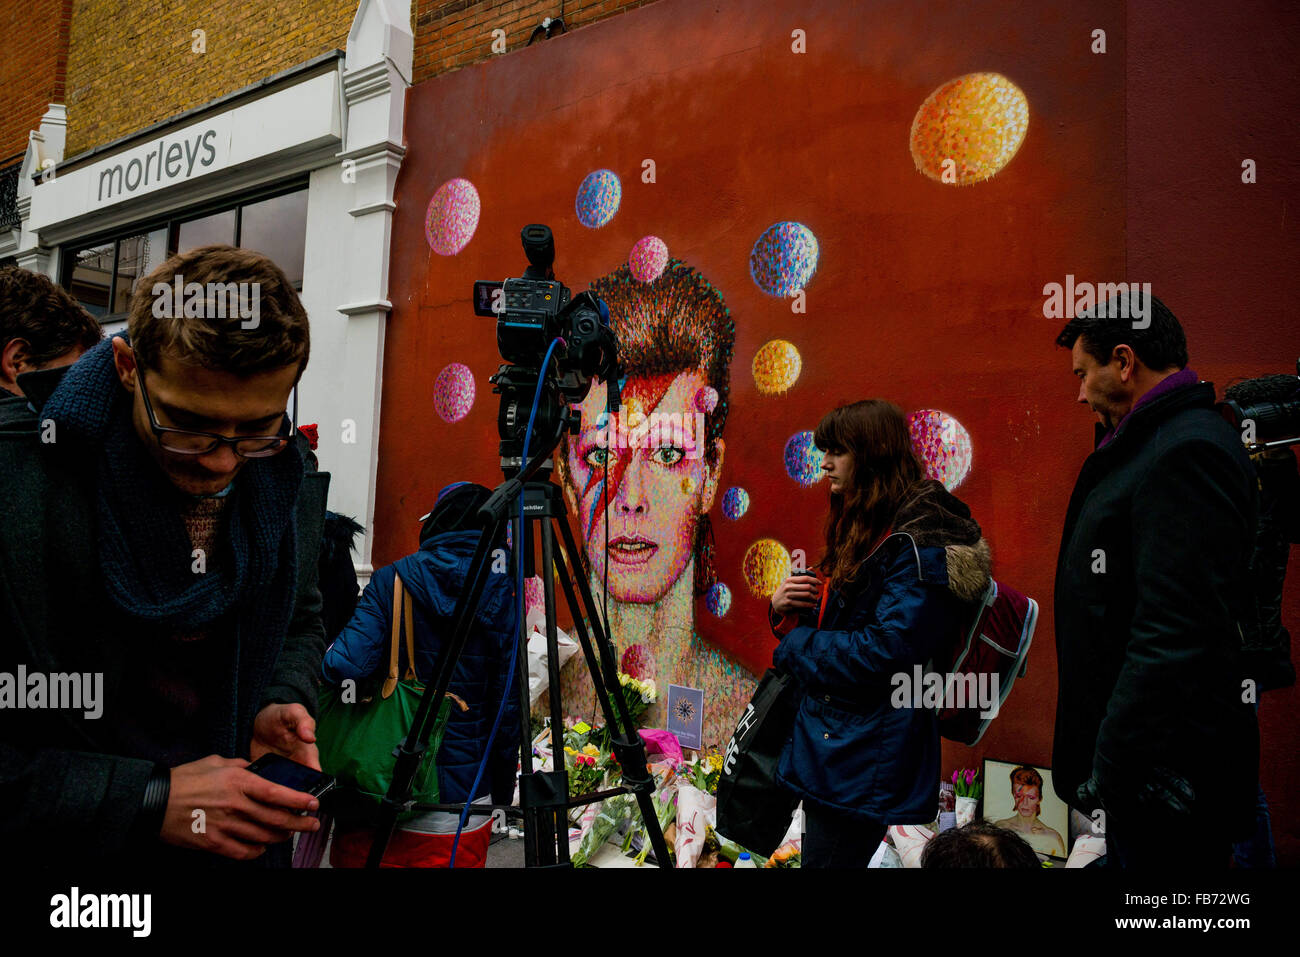 Jan. 11, 2016 - London, UK - Londoners paying tribute to David Bowie at a mural to the star in Brixton, where he grew up. Bowie dies today of cancer aged 69. (Credit Image: © Velar Grant via ZUMA Wire) Stock Photo